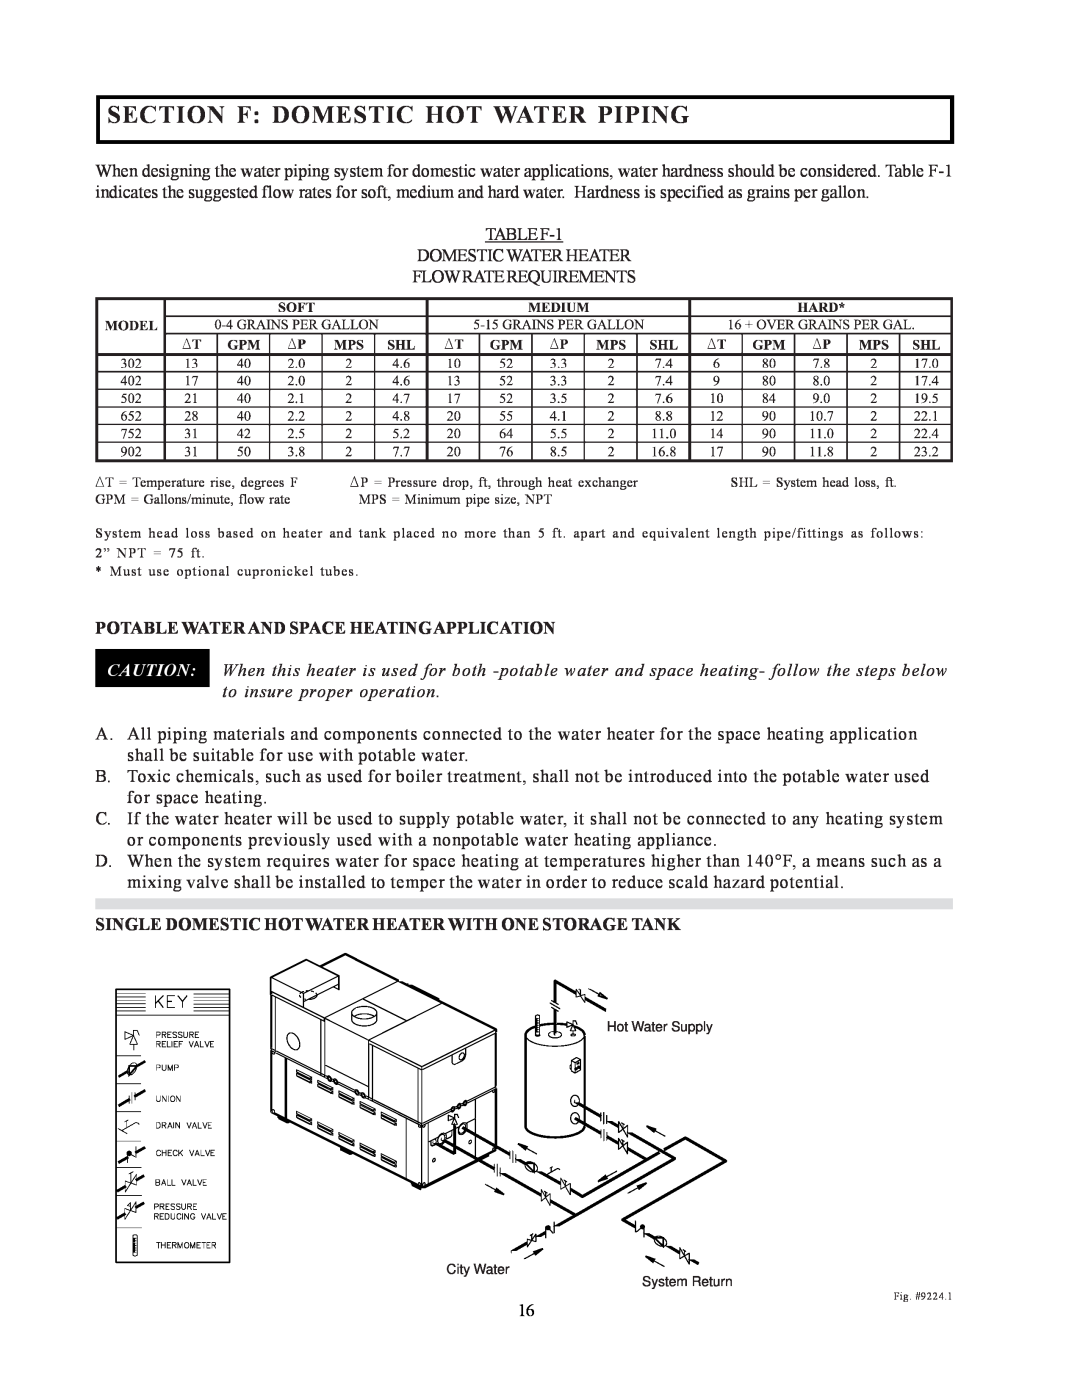 Raypak 302-902 manual Section F Domestic Hot Water Piping, Potable Water And Space Heatingapplication 